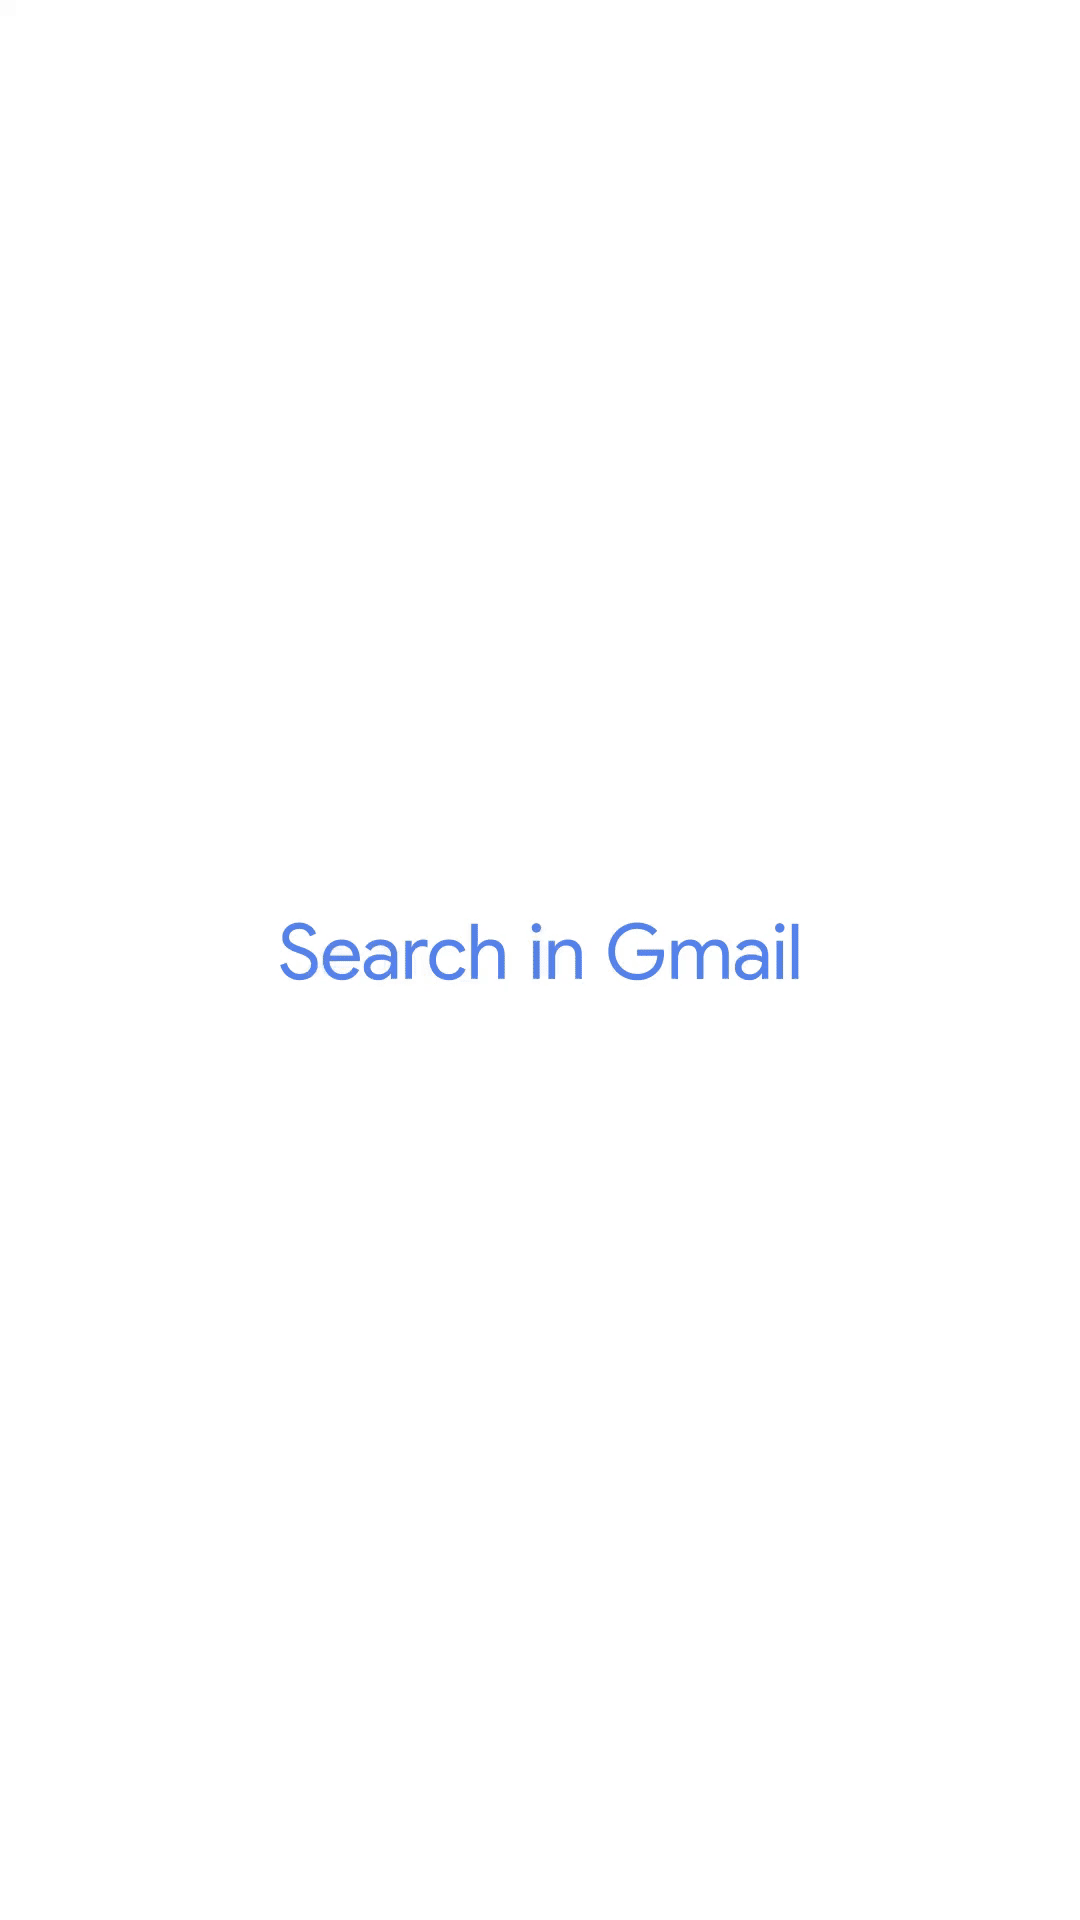 An illustration of searching in Gmail on Android